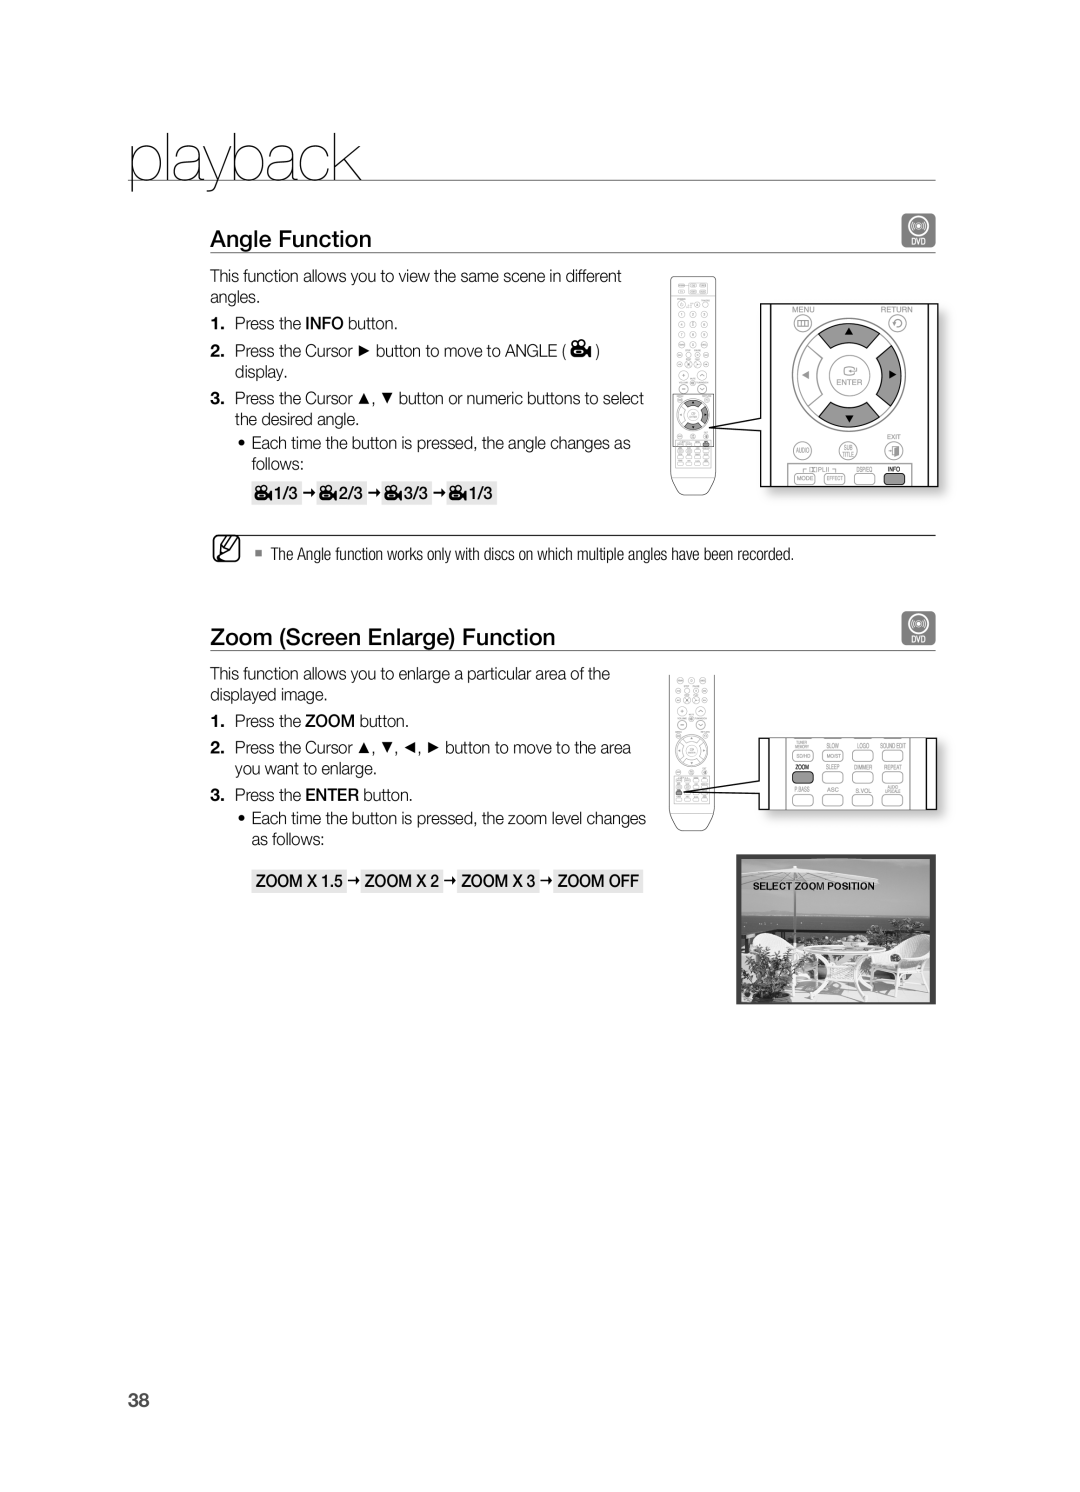 Samsung HT-TX715 user manual playback, Angle Function, Zoom Screen Enlarge Function 